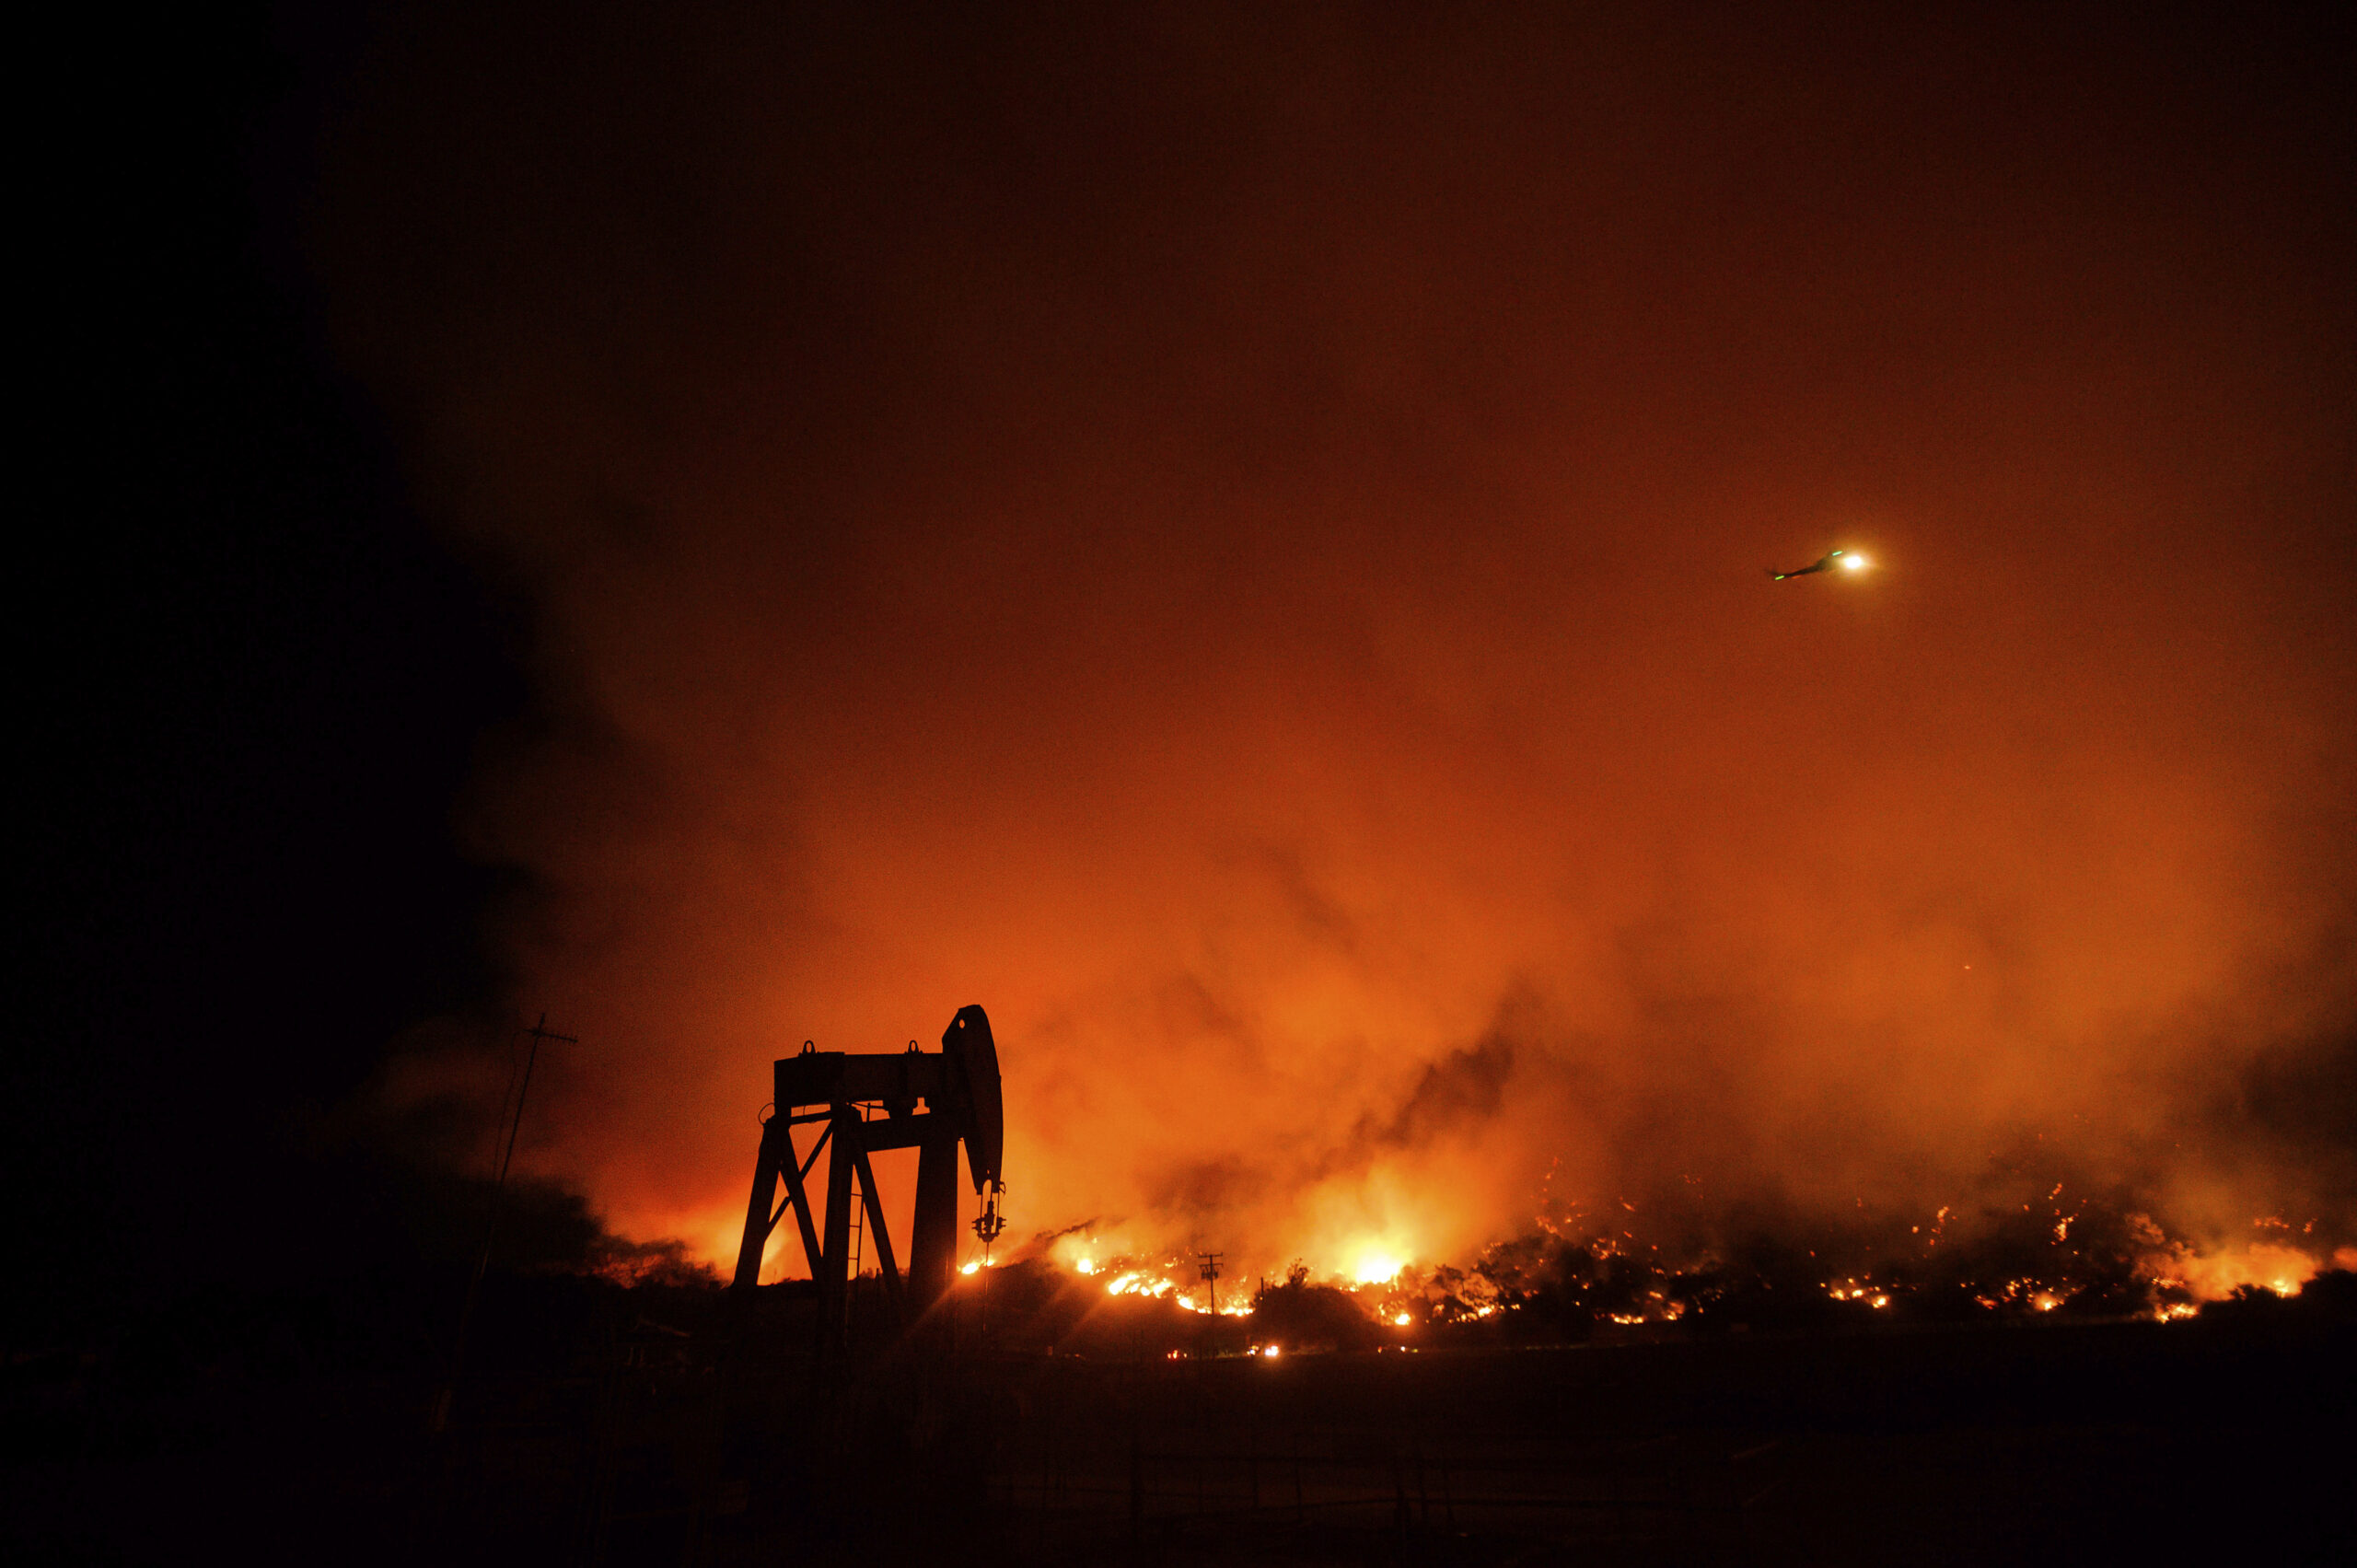 orange flames from a wildfire in California burning at night in the distance, with the silhouette of an oil and gas pumpjack in the foreground.